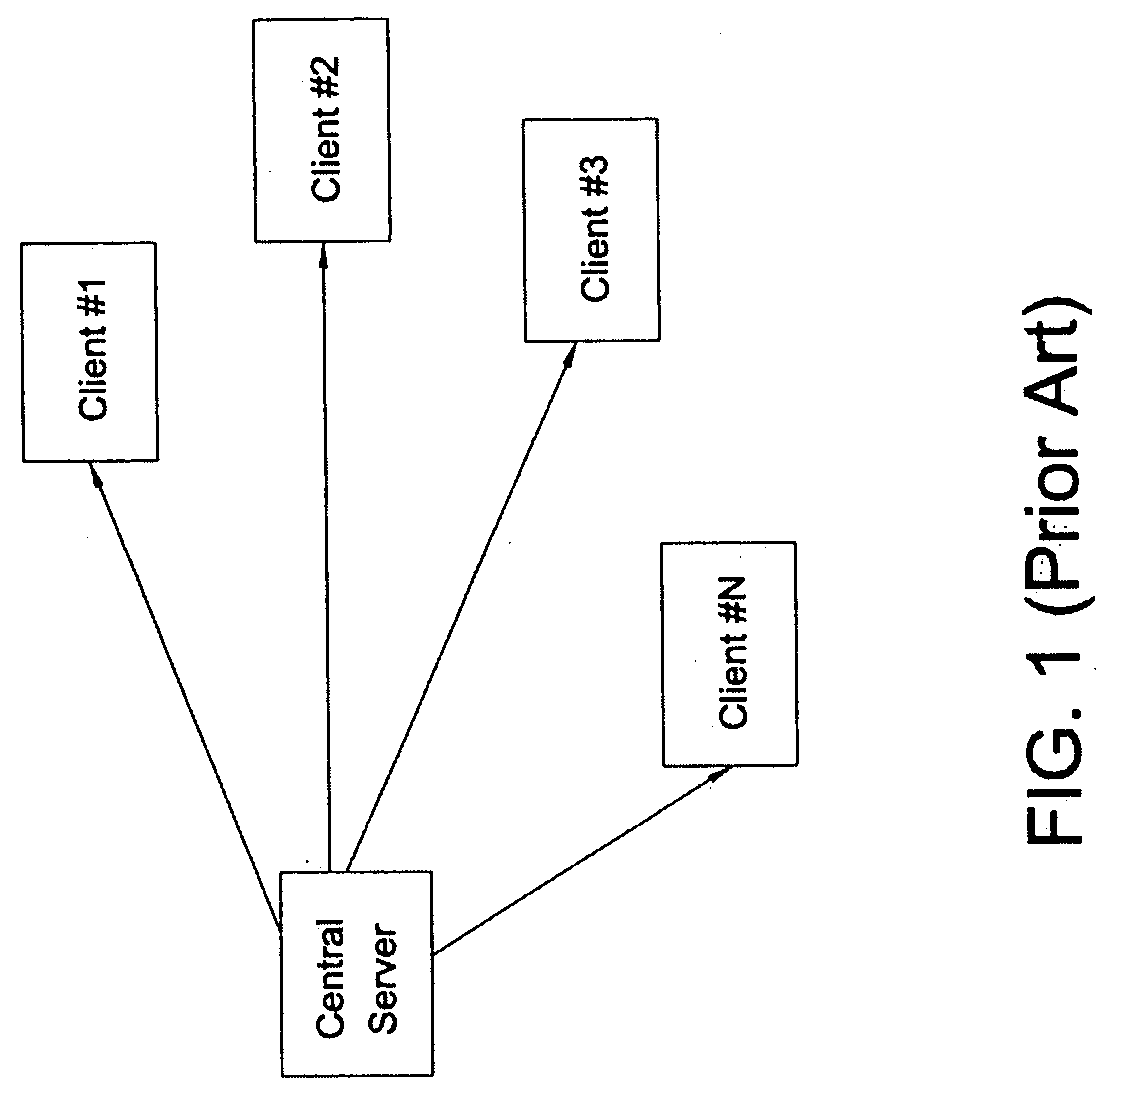 P2P-based broadcast system and method using the same